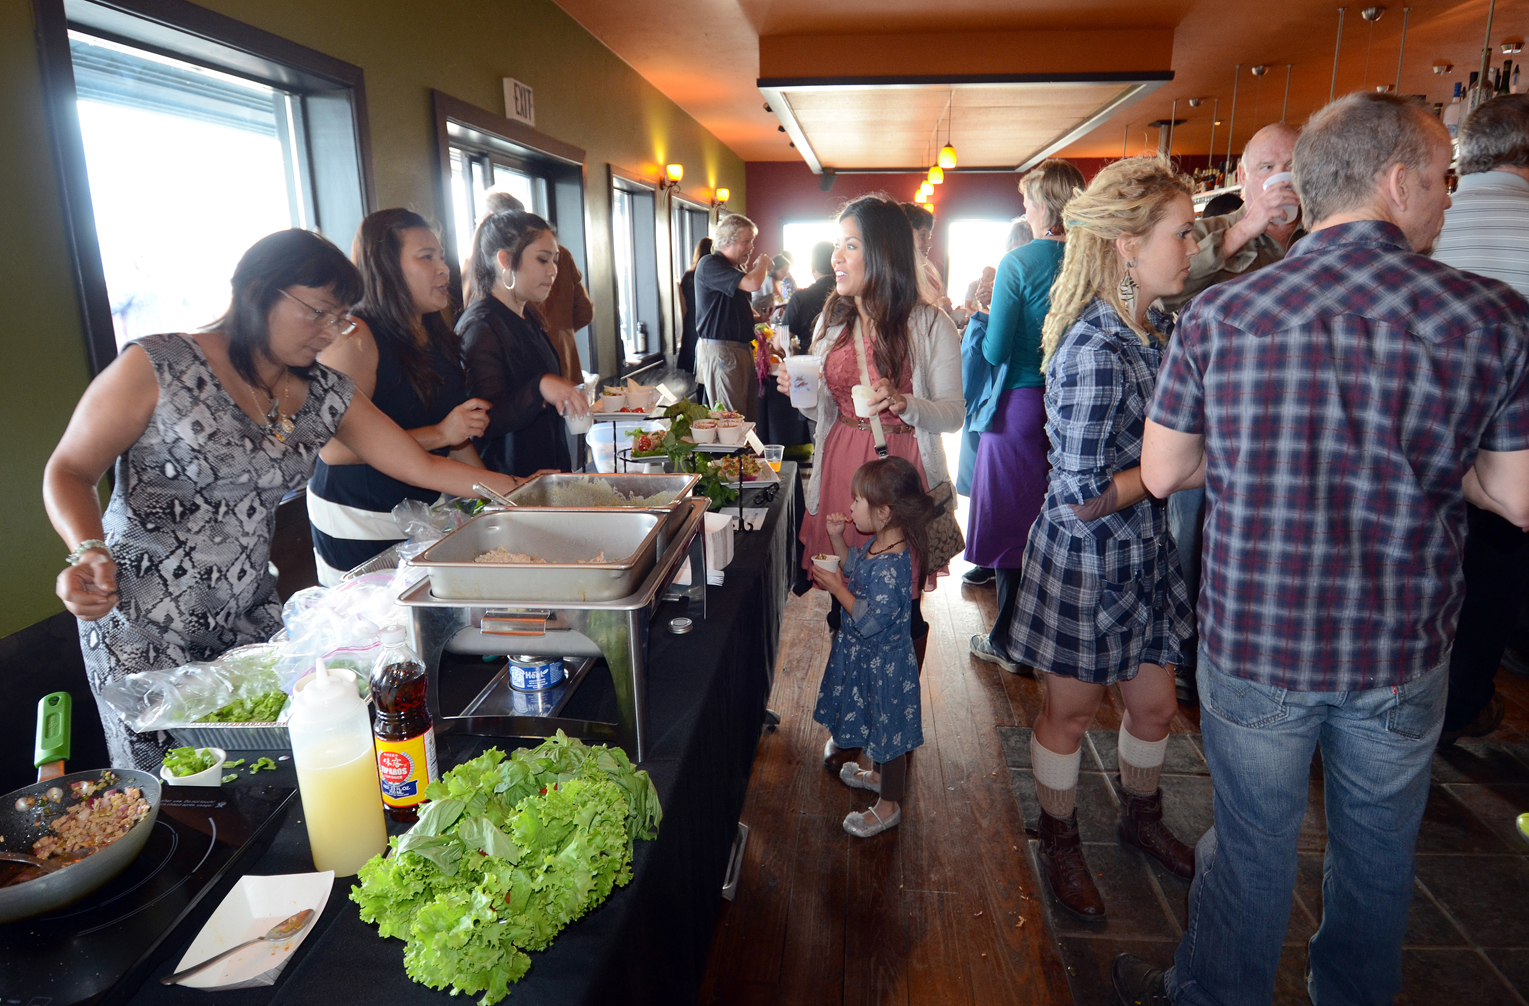 A variety of food and drink to please young and old palates is served and sampled Saturday during the second annual Taste of Homer. The event was again held at Wasabi’s.-Photo by Jim Lavrakas, Far North Photography